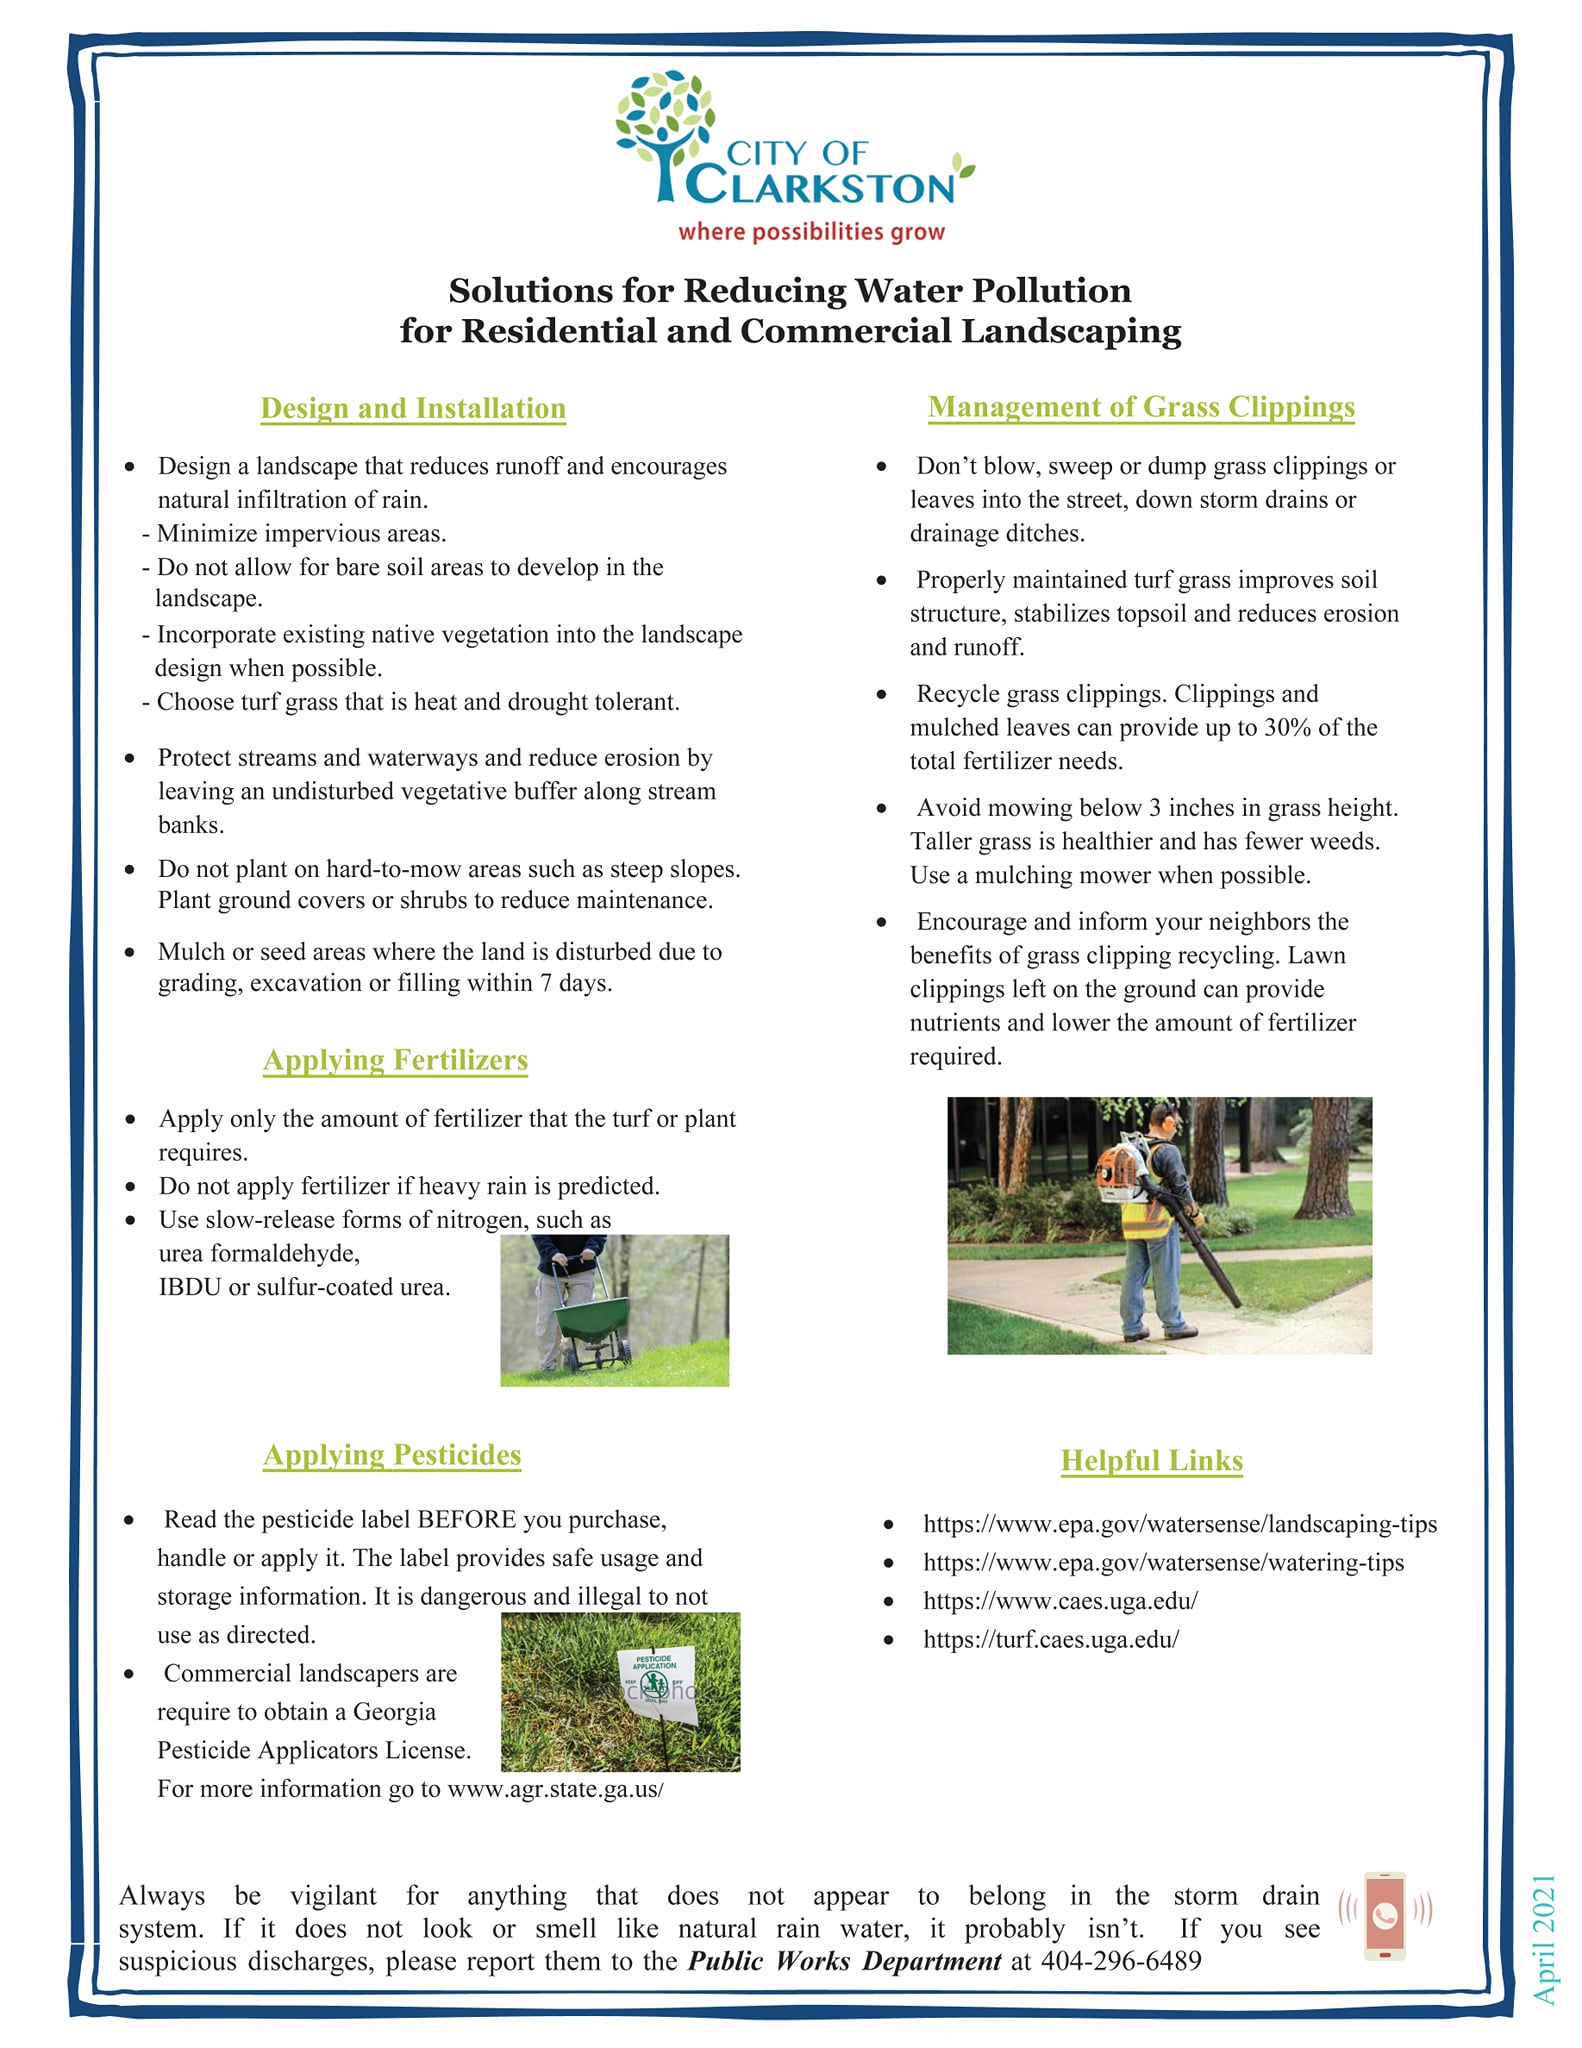 stormwater newsletter landscaping